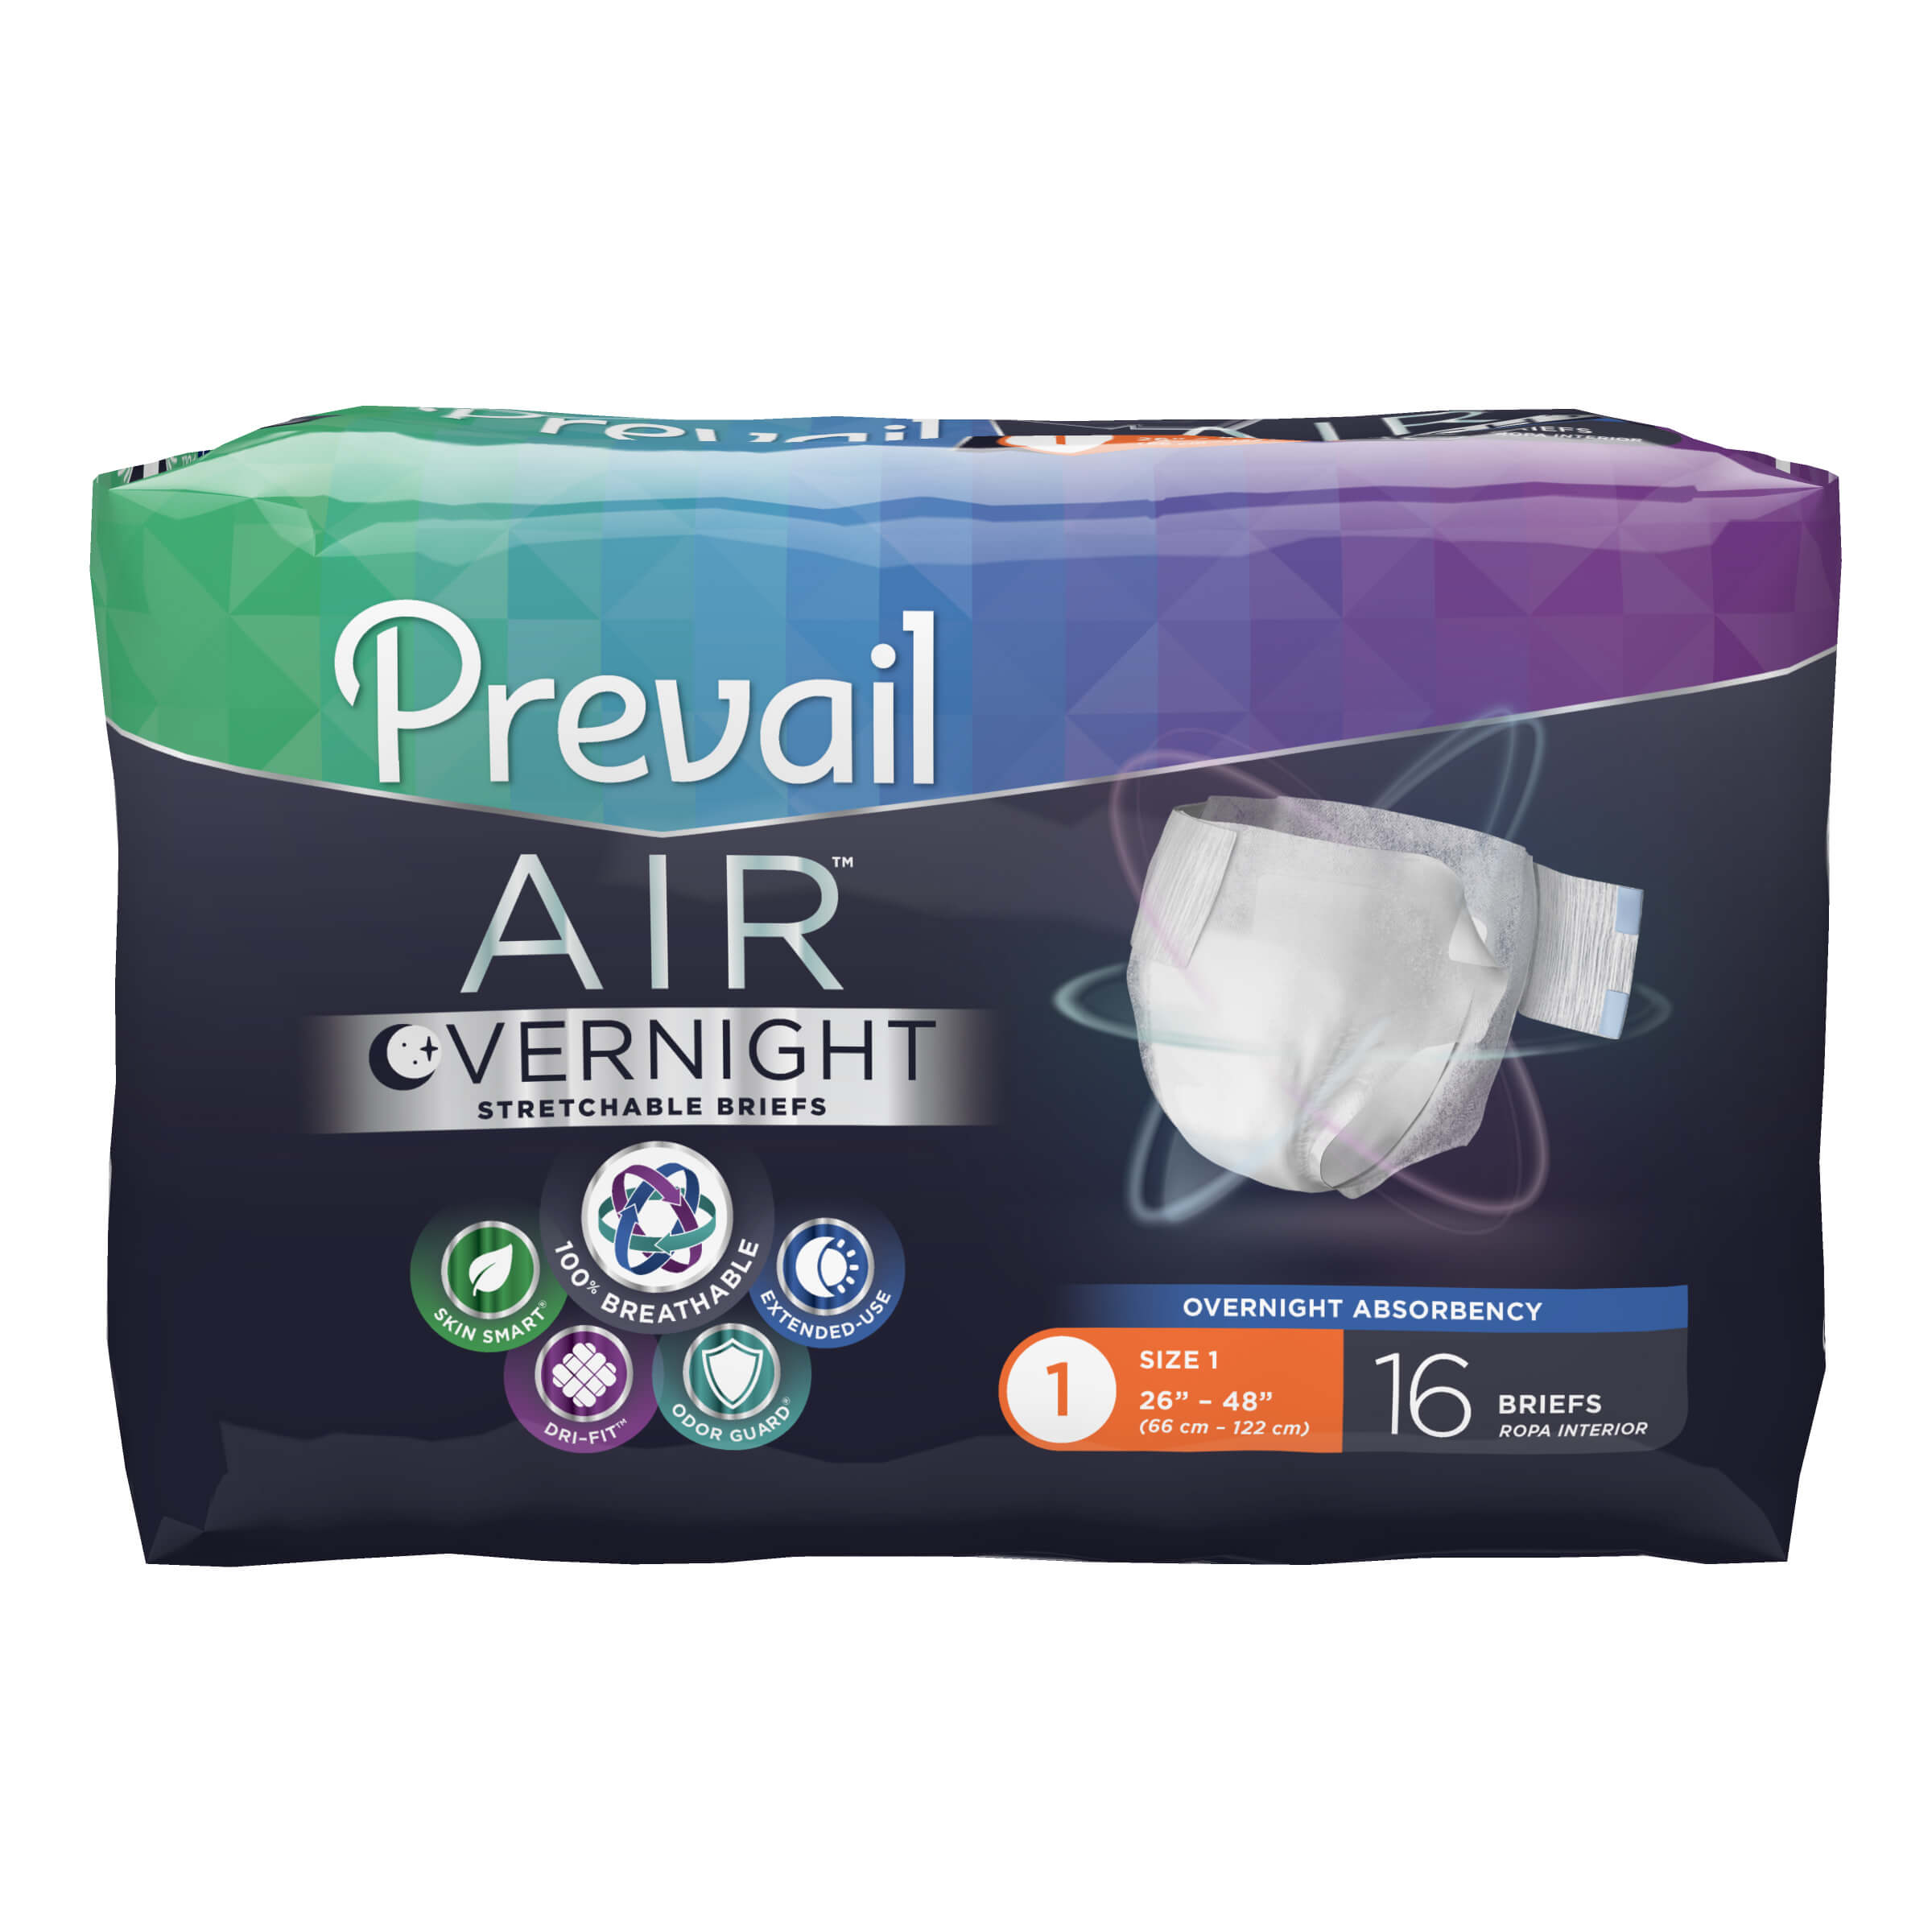 Prevail Air Overnight Stretchable Briefs, MedProDirect Canada